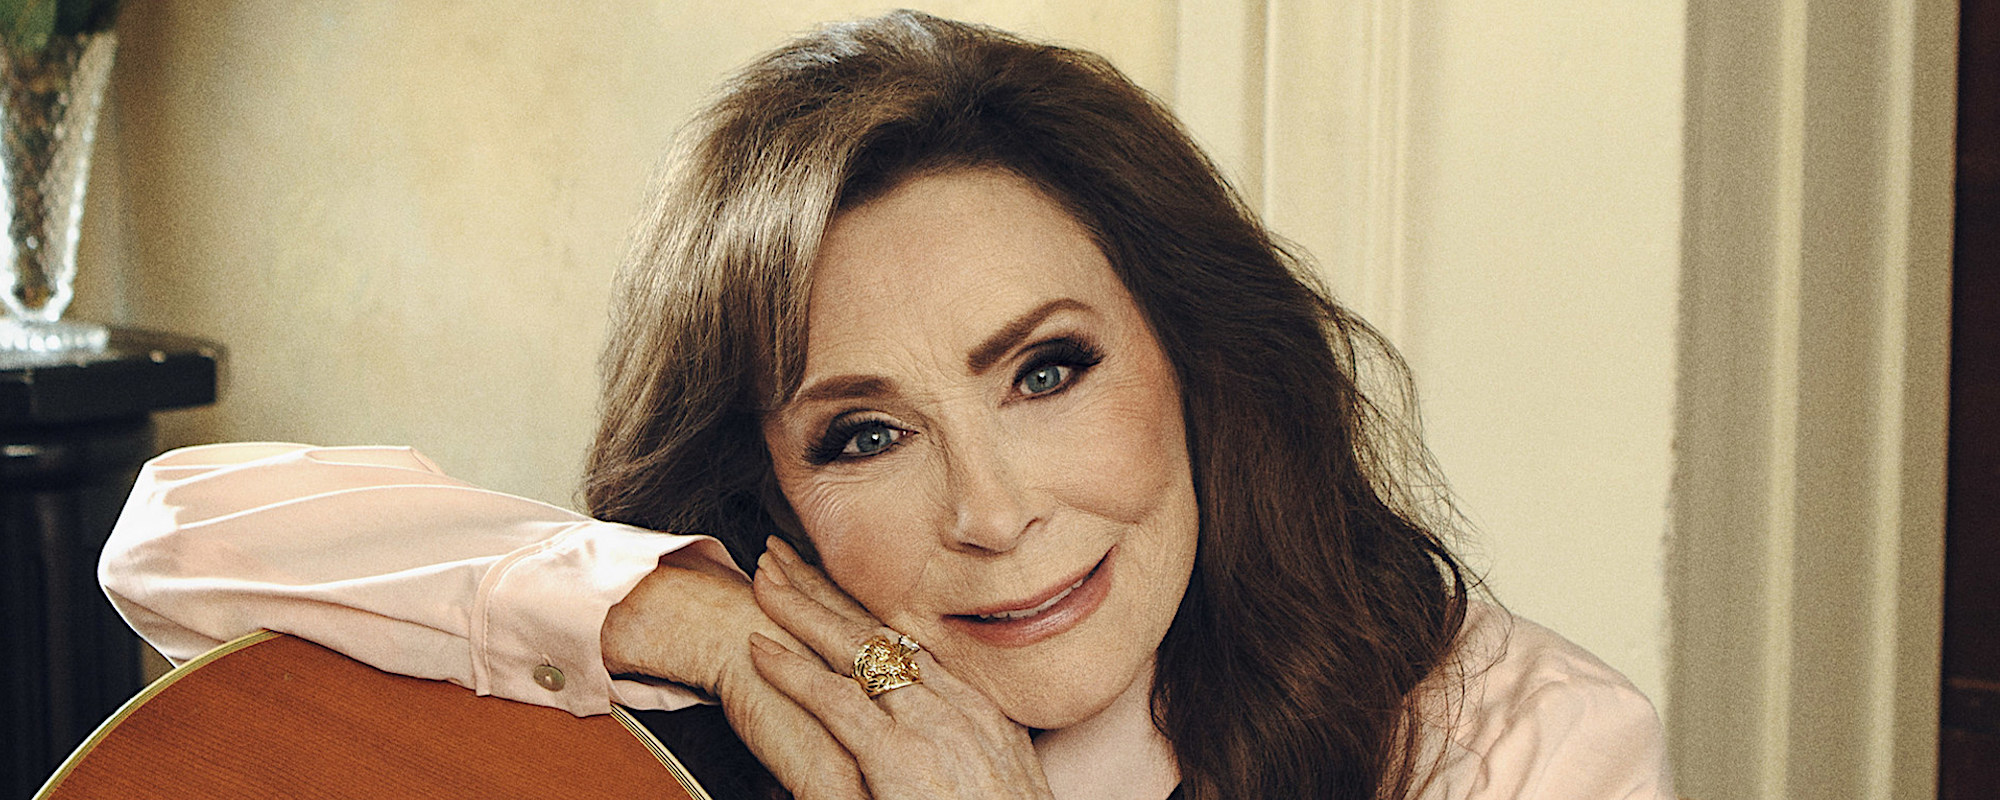 Revisiting the Meaning of Loretta Lynn’s 1975 Women’s Reproductive Rights Song “The Pill”